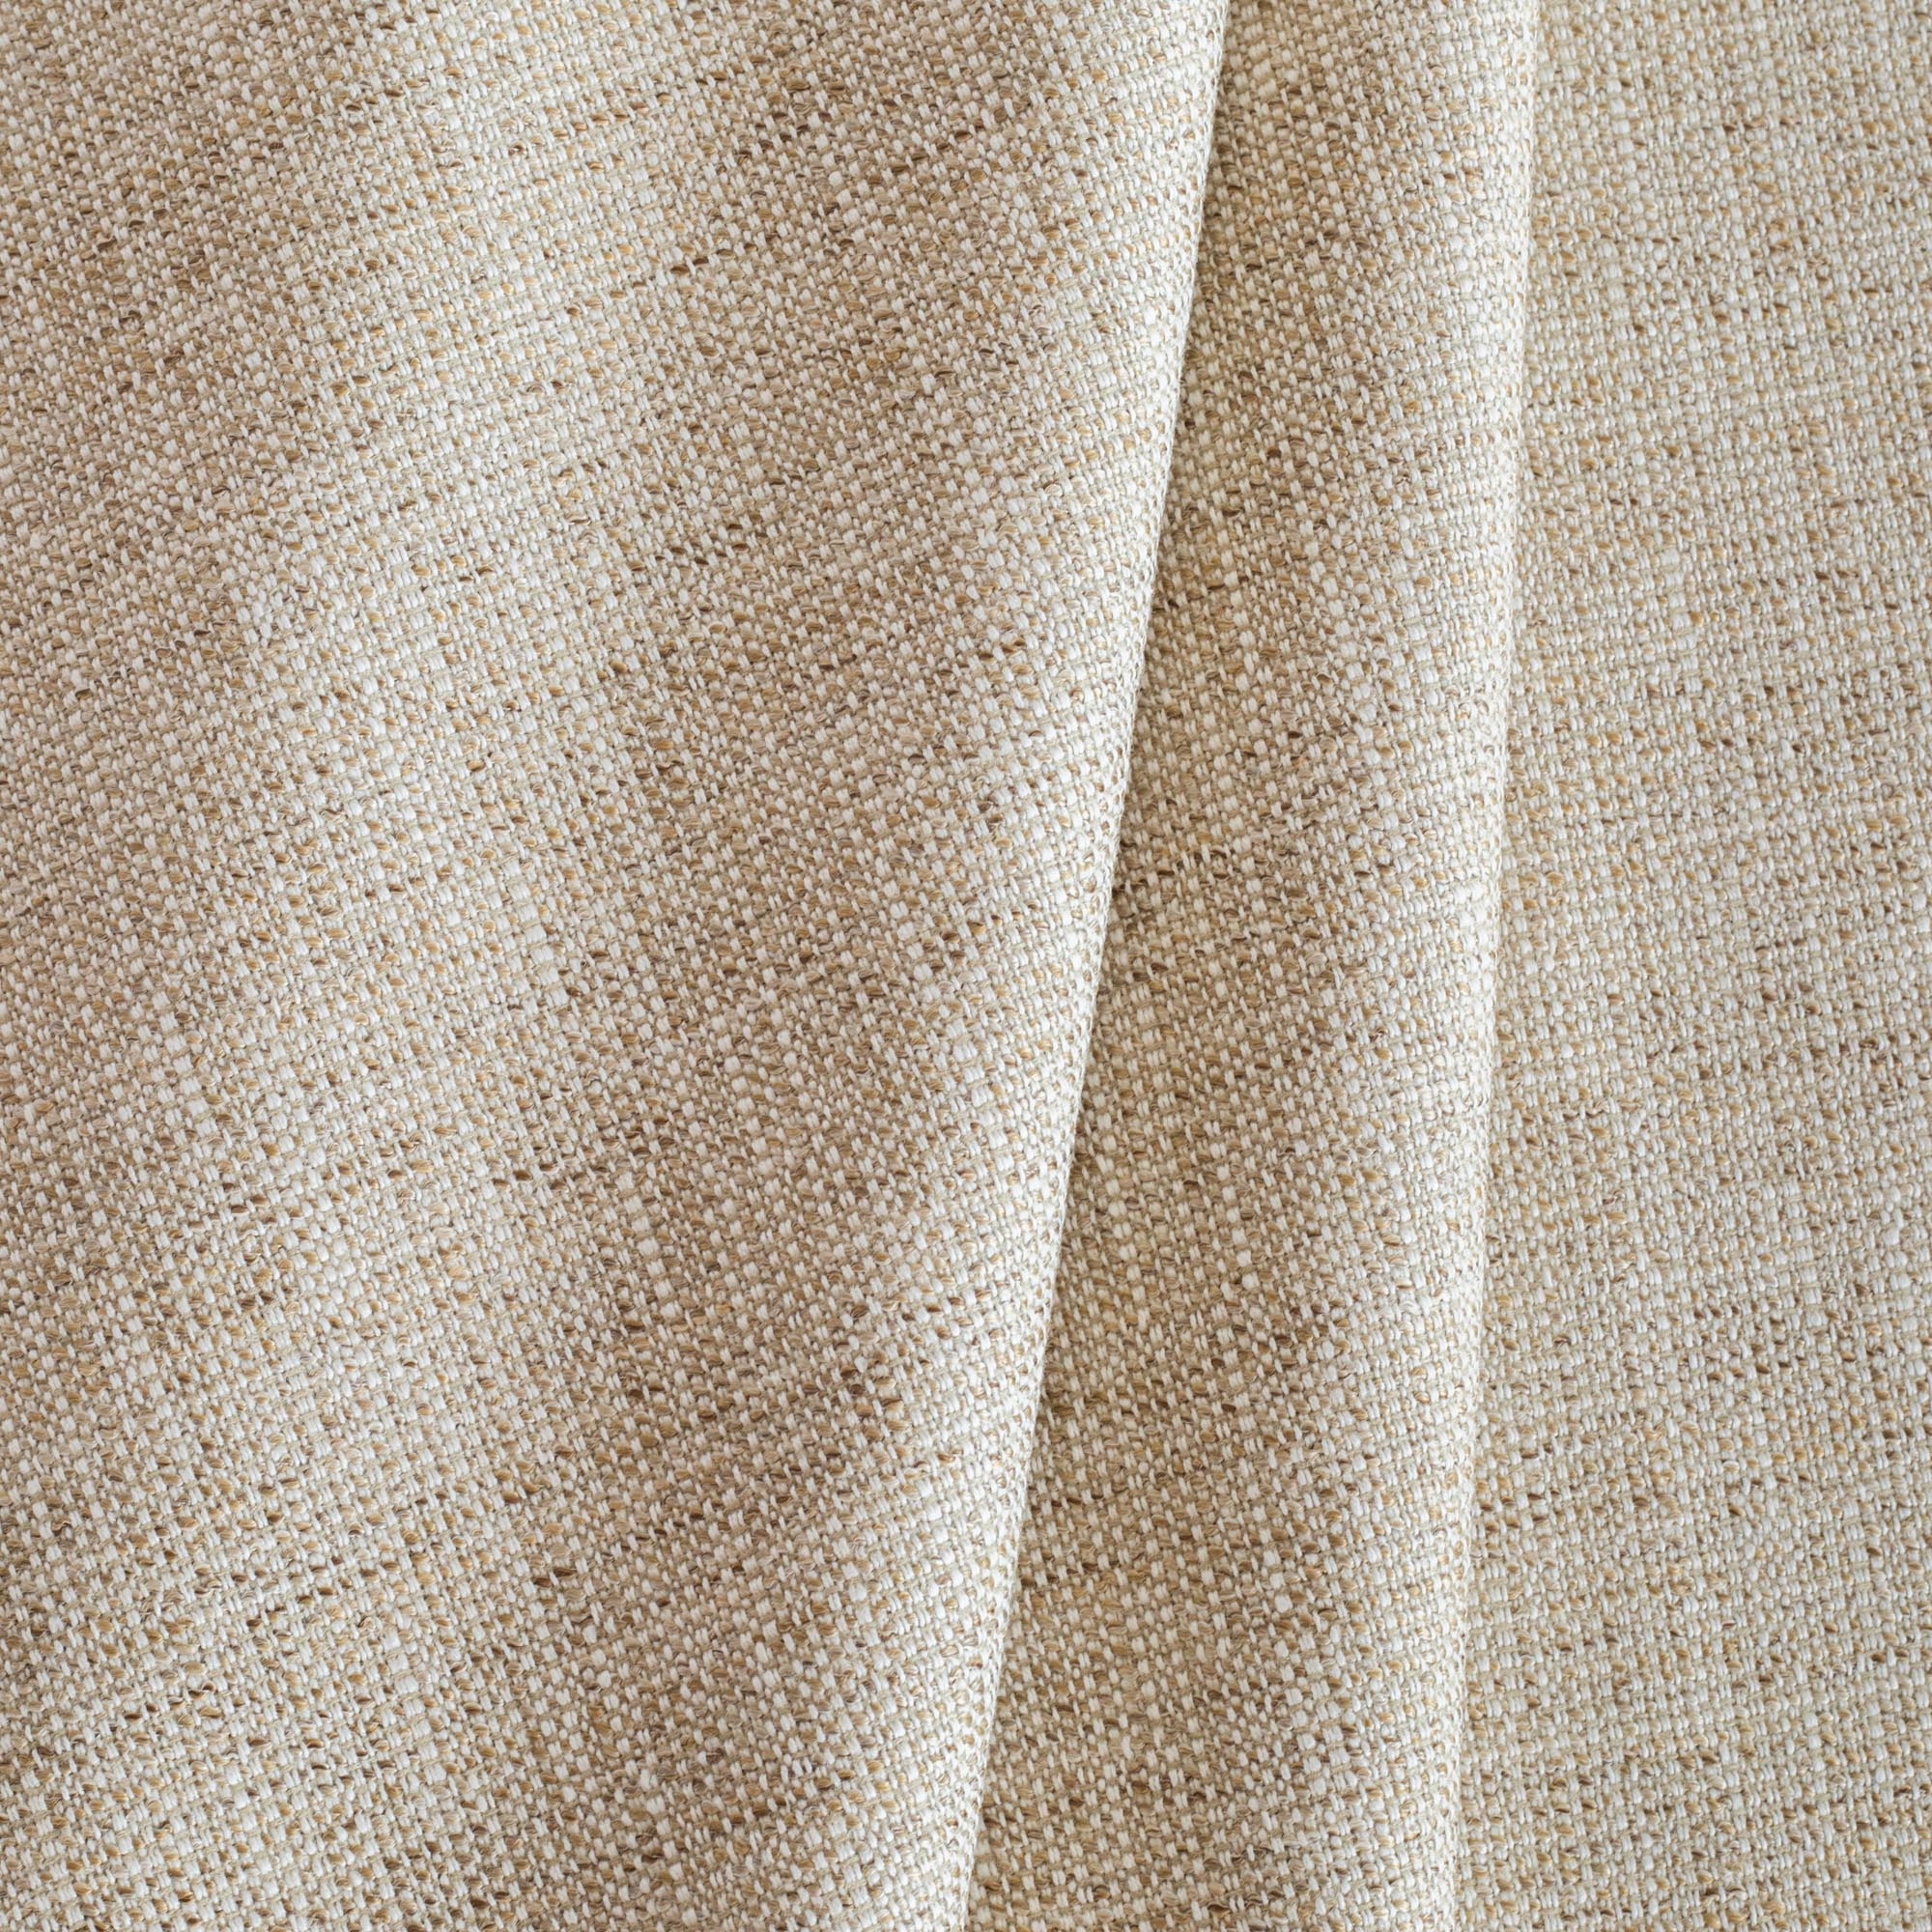 Current Sisal Outdoor Fabric